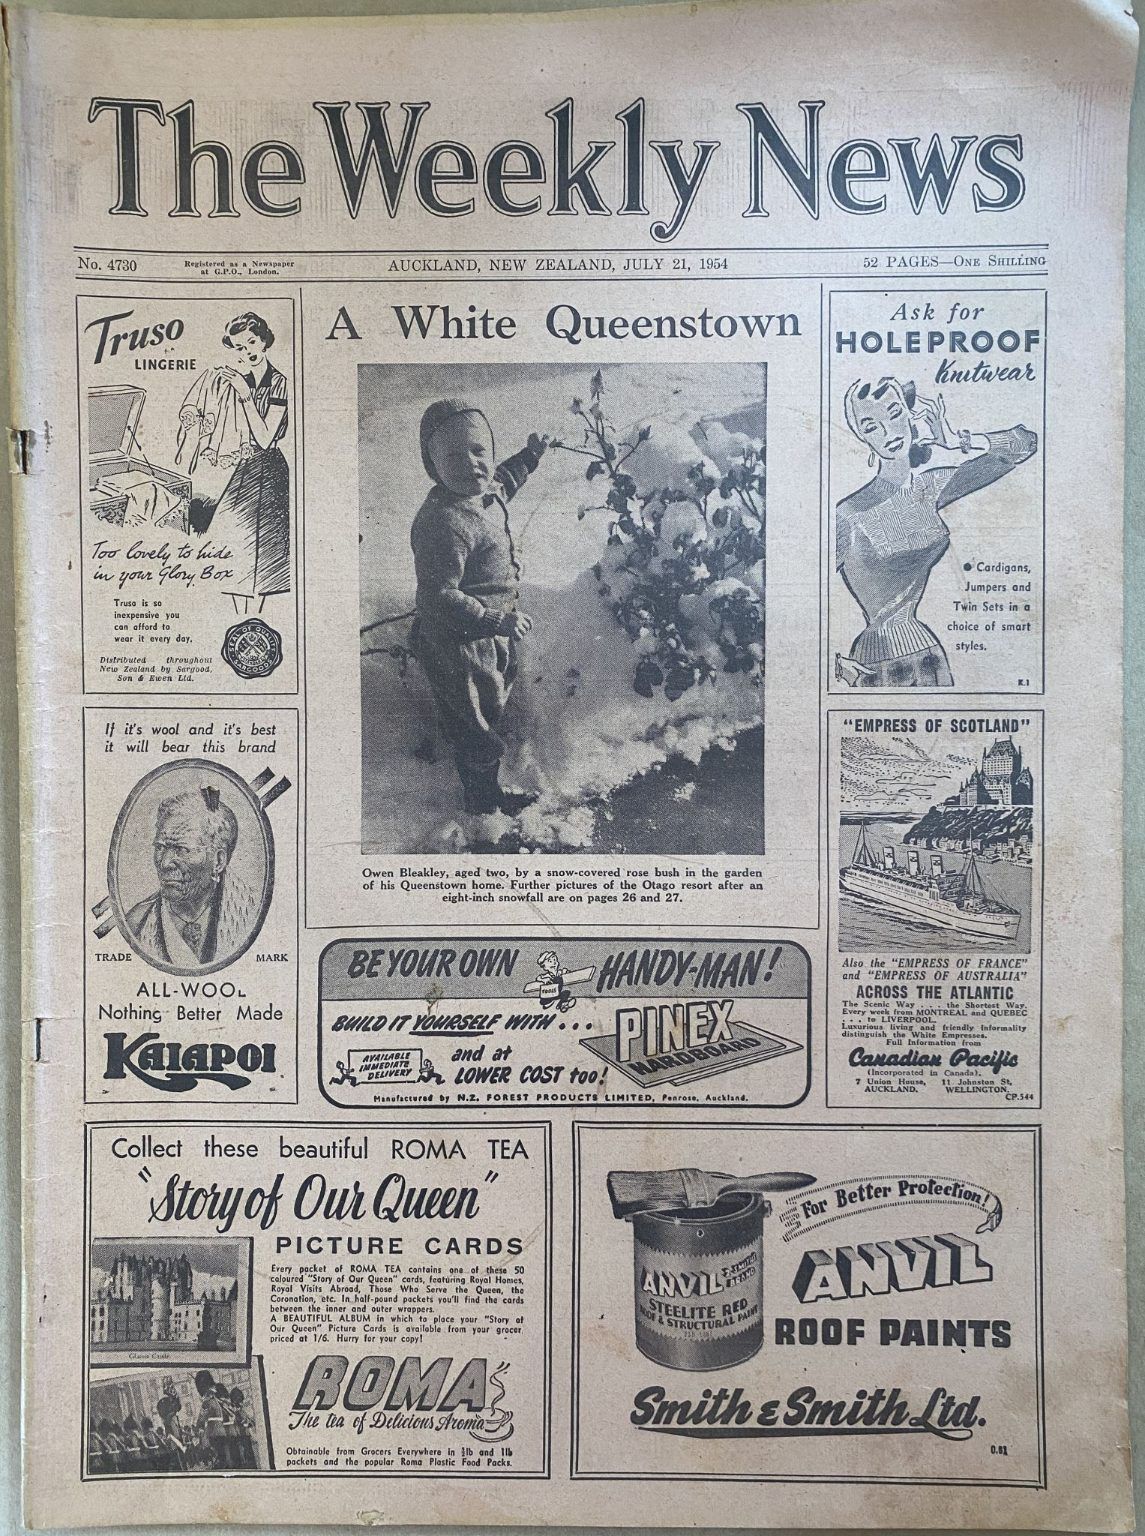 OLD NEWSPAPER: The Weekly News - No. 4730, 21 July 1954